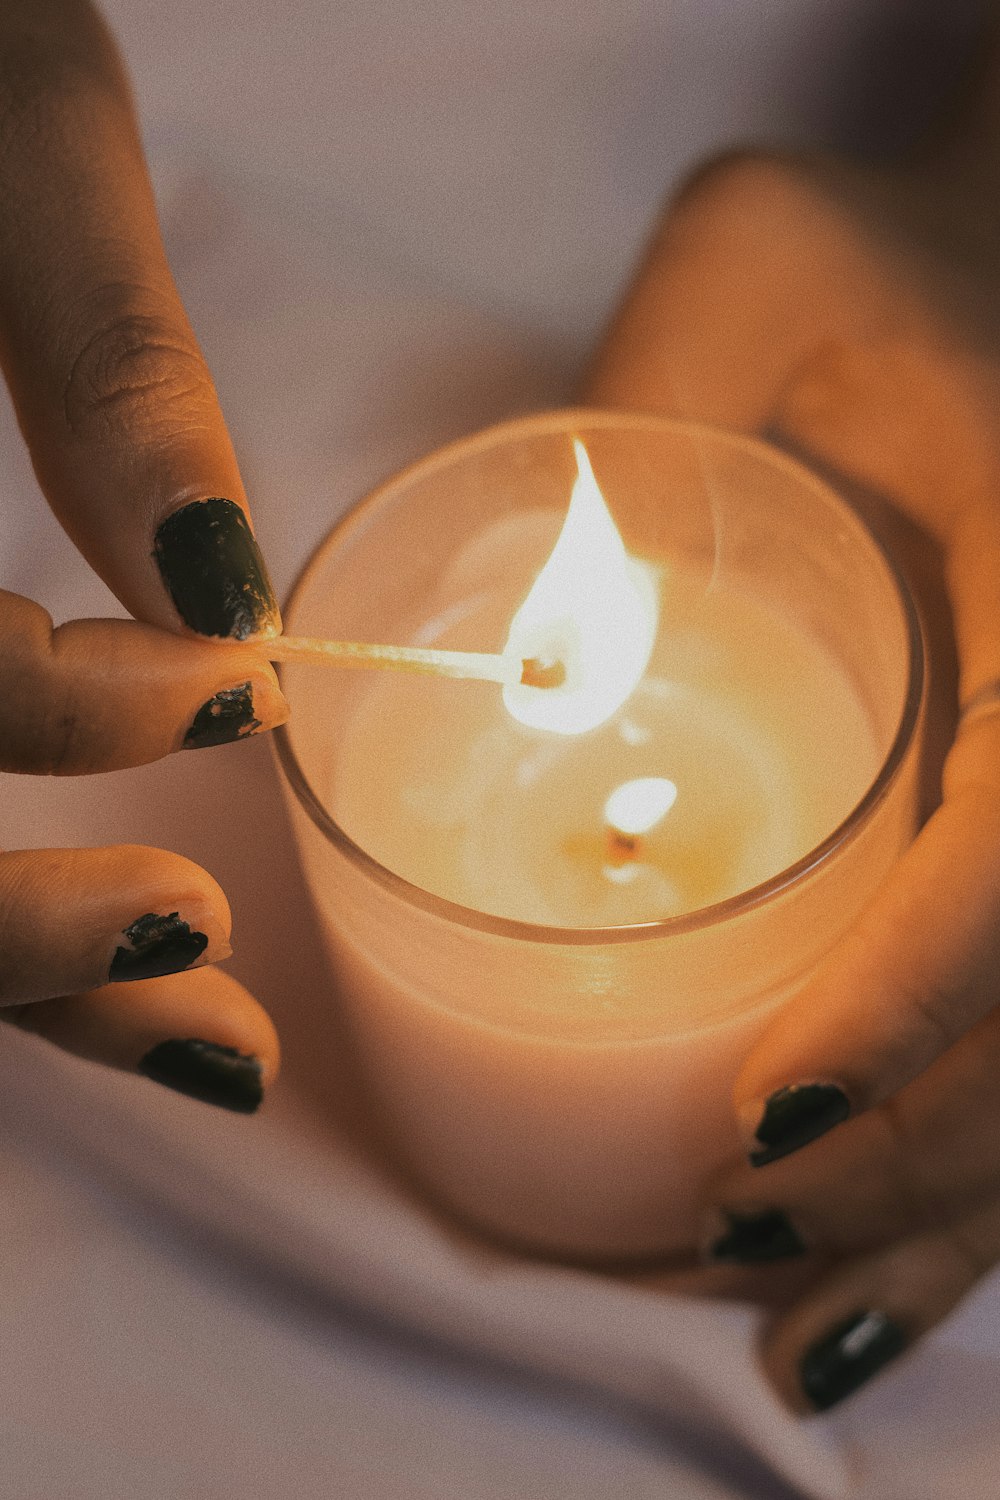 person holding lighted candle stick